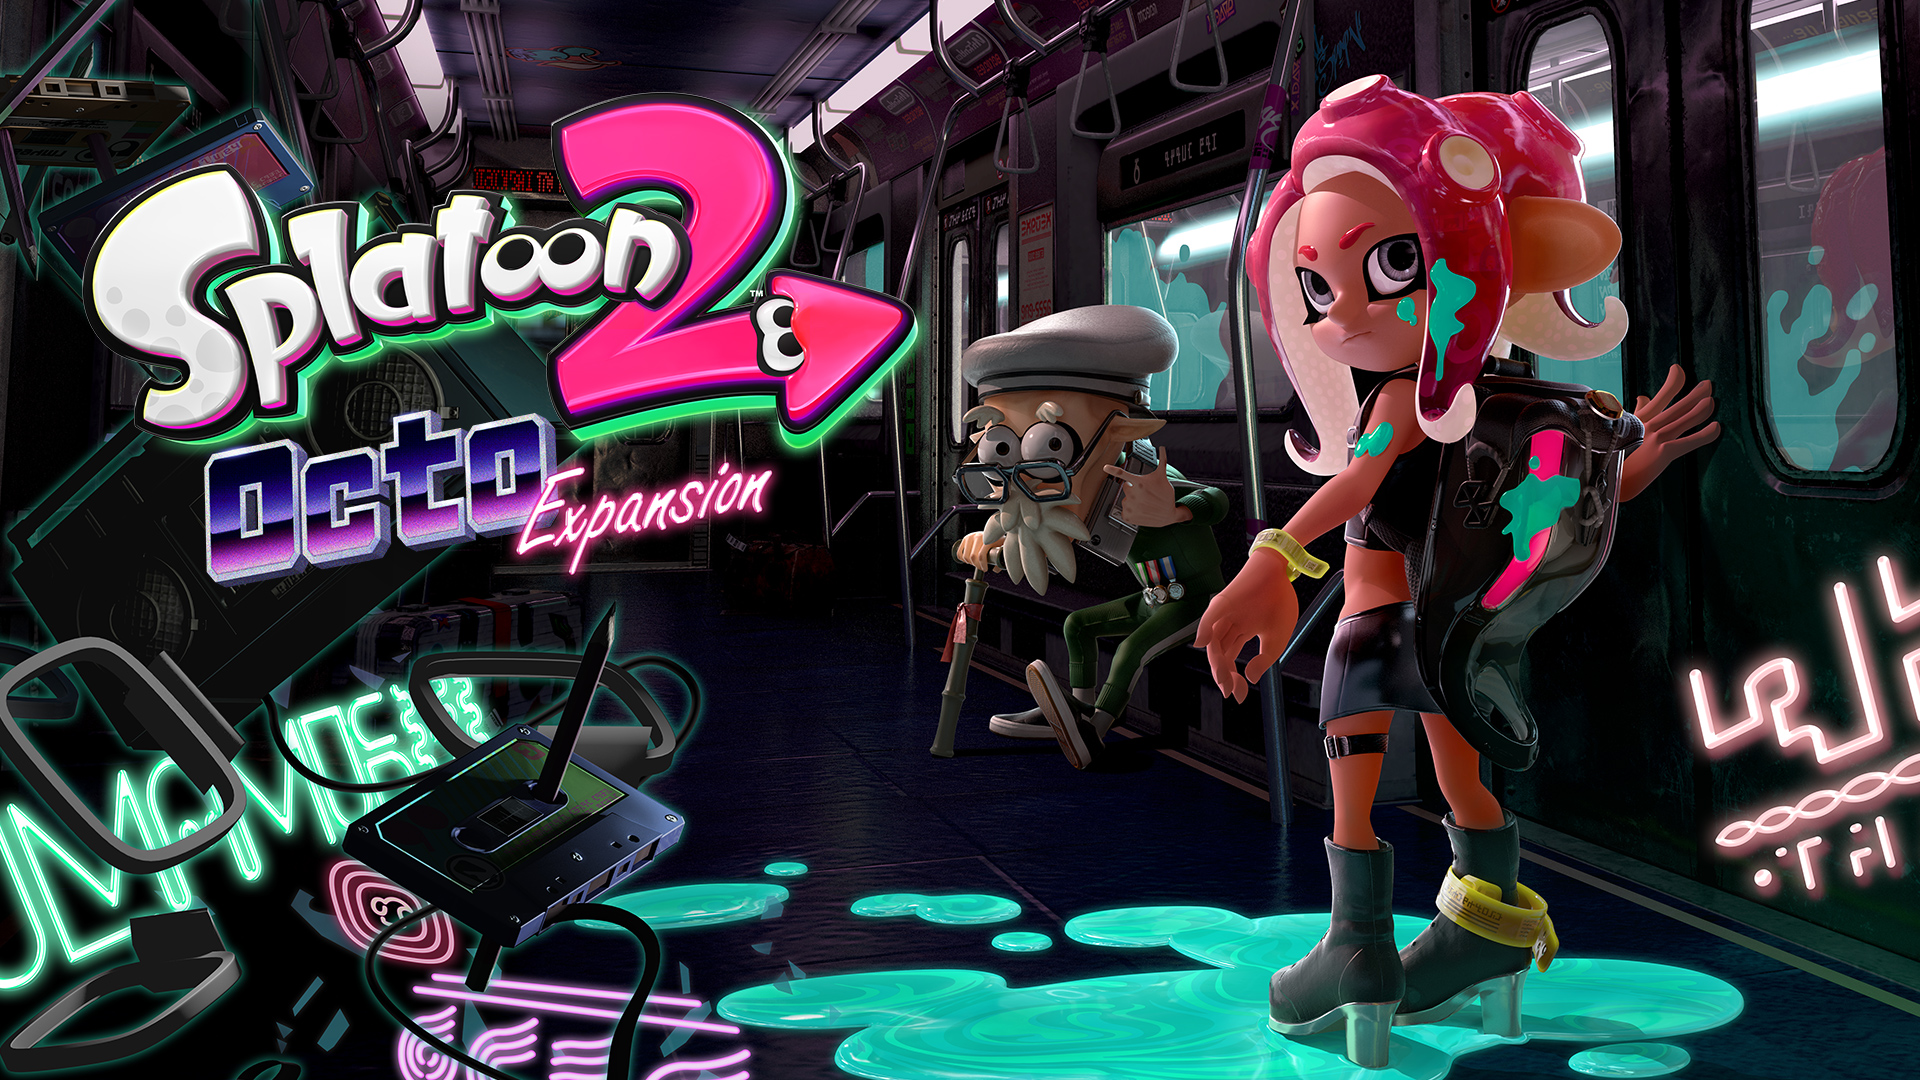 Agent 8, the protagonist of the Octo Expansion, next to Captain Cuddlefish in the traincar.